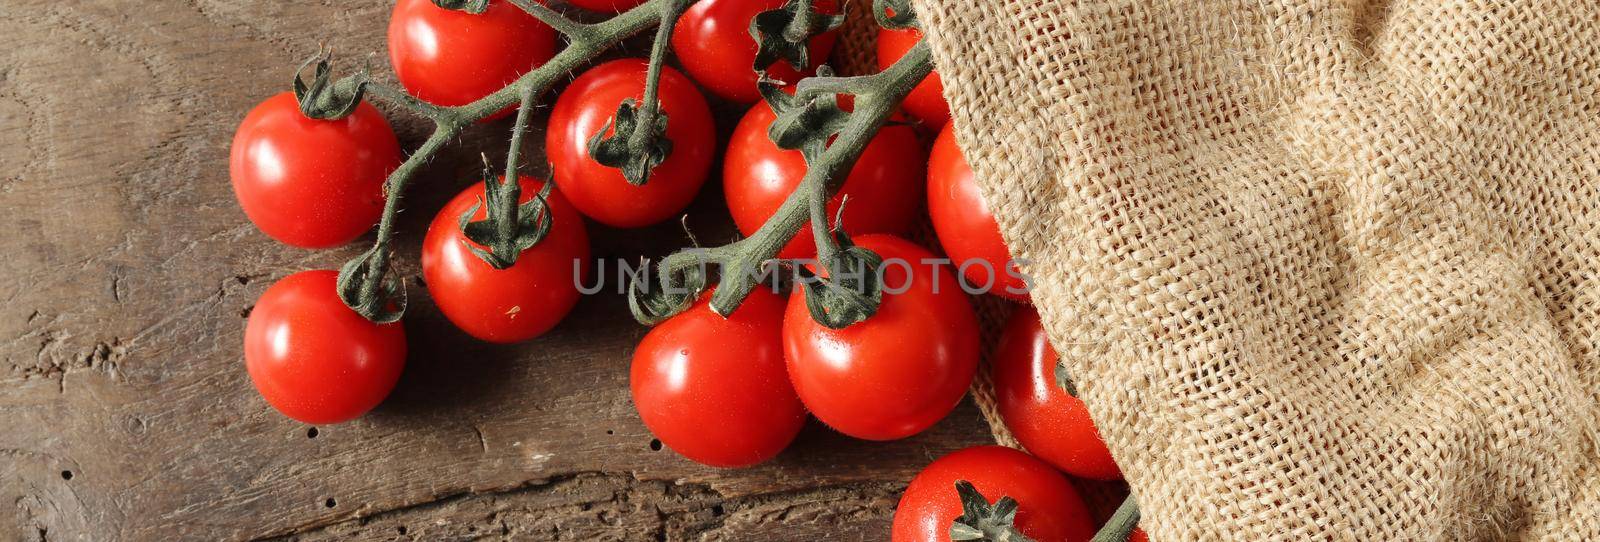 Rustic background with tomatoes, canvas bag on old wooden background. Rustic kitchen with tomatoes